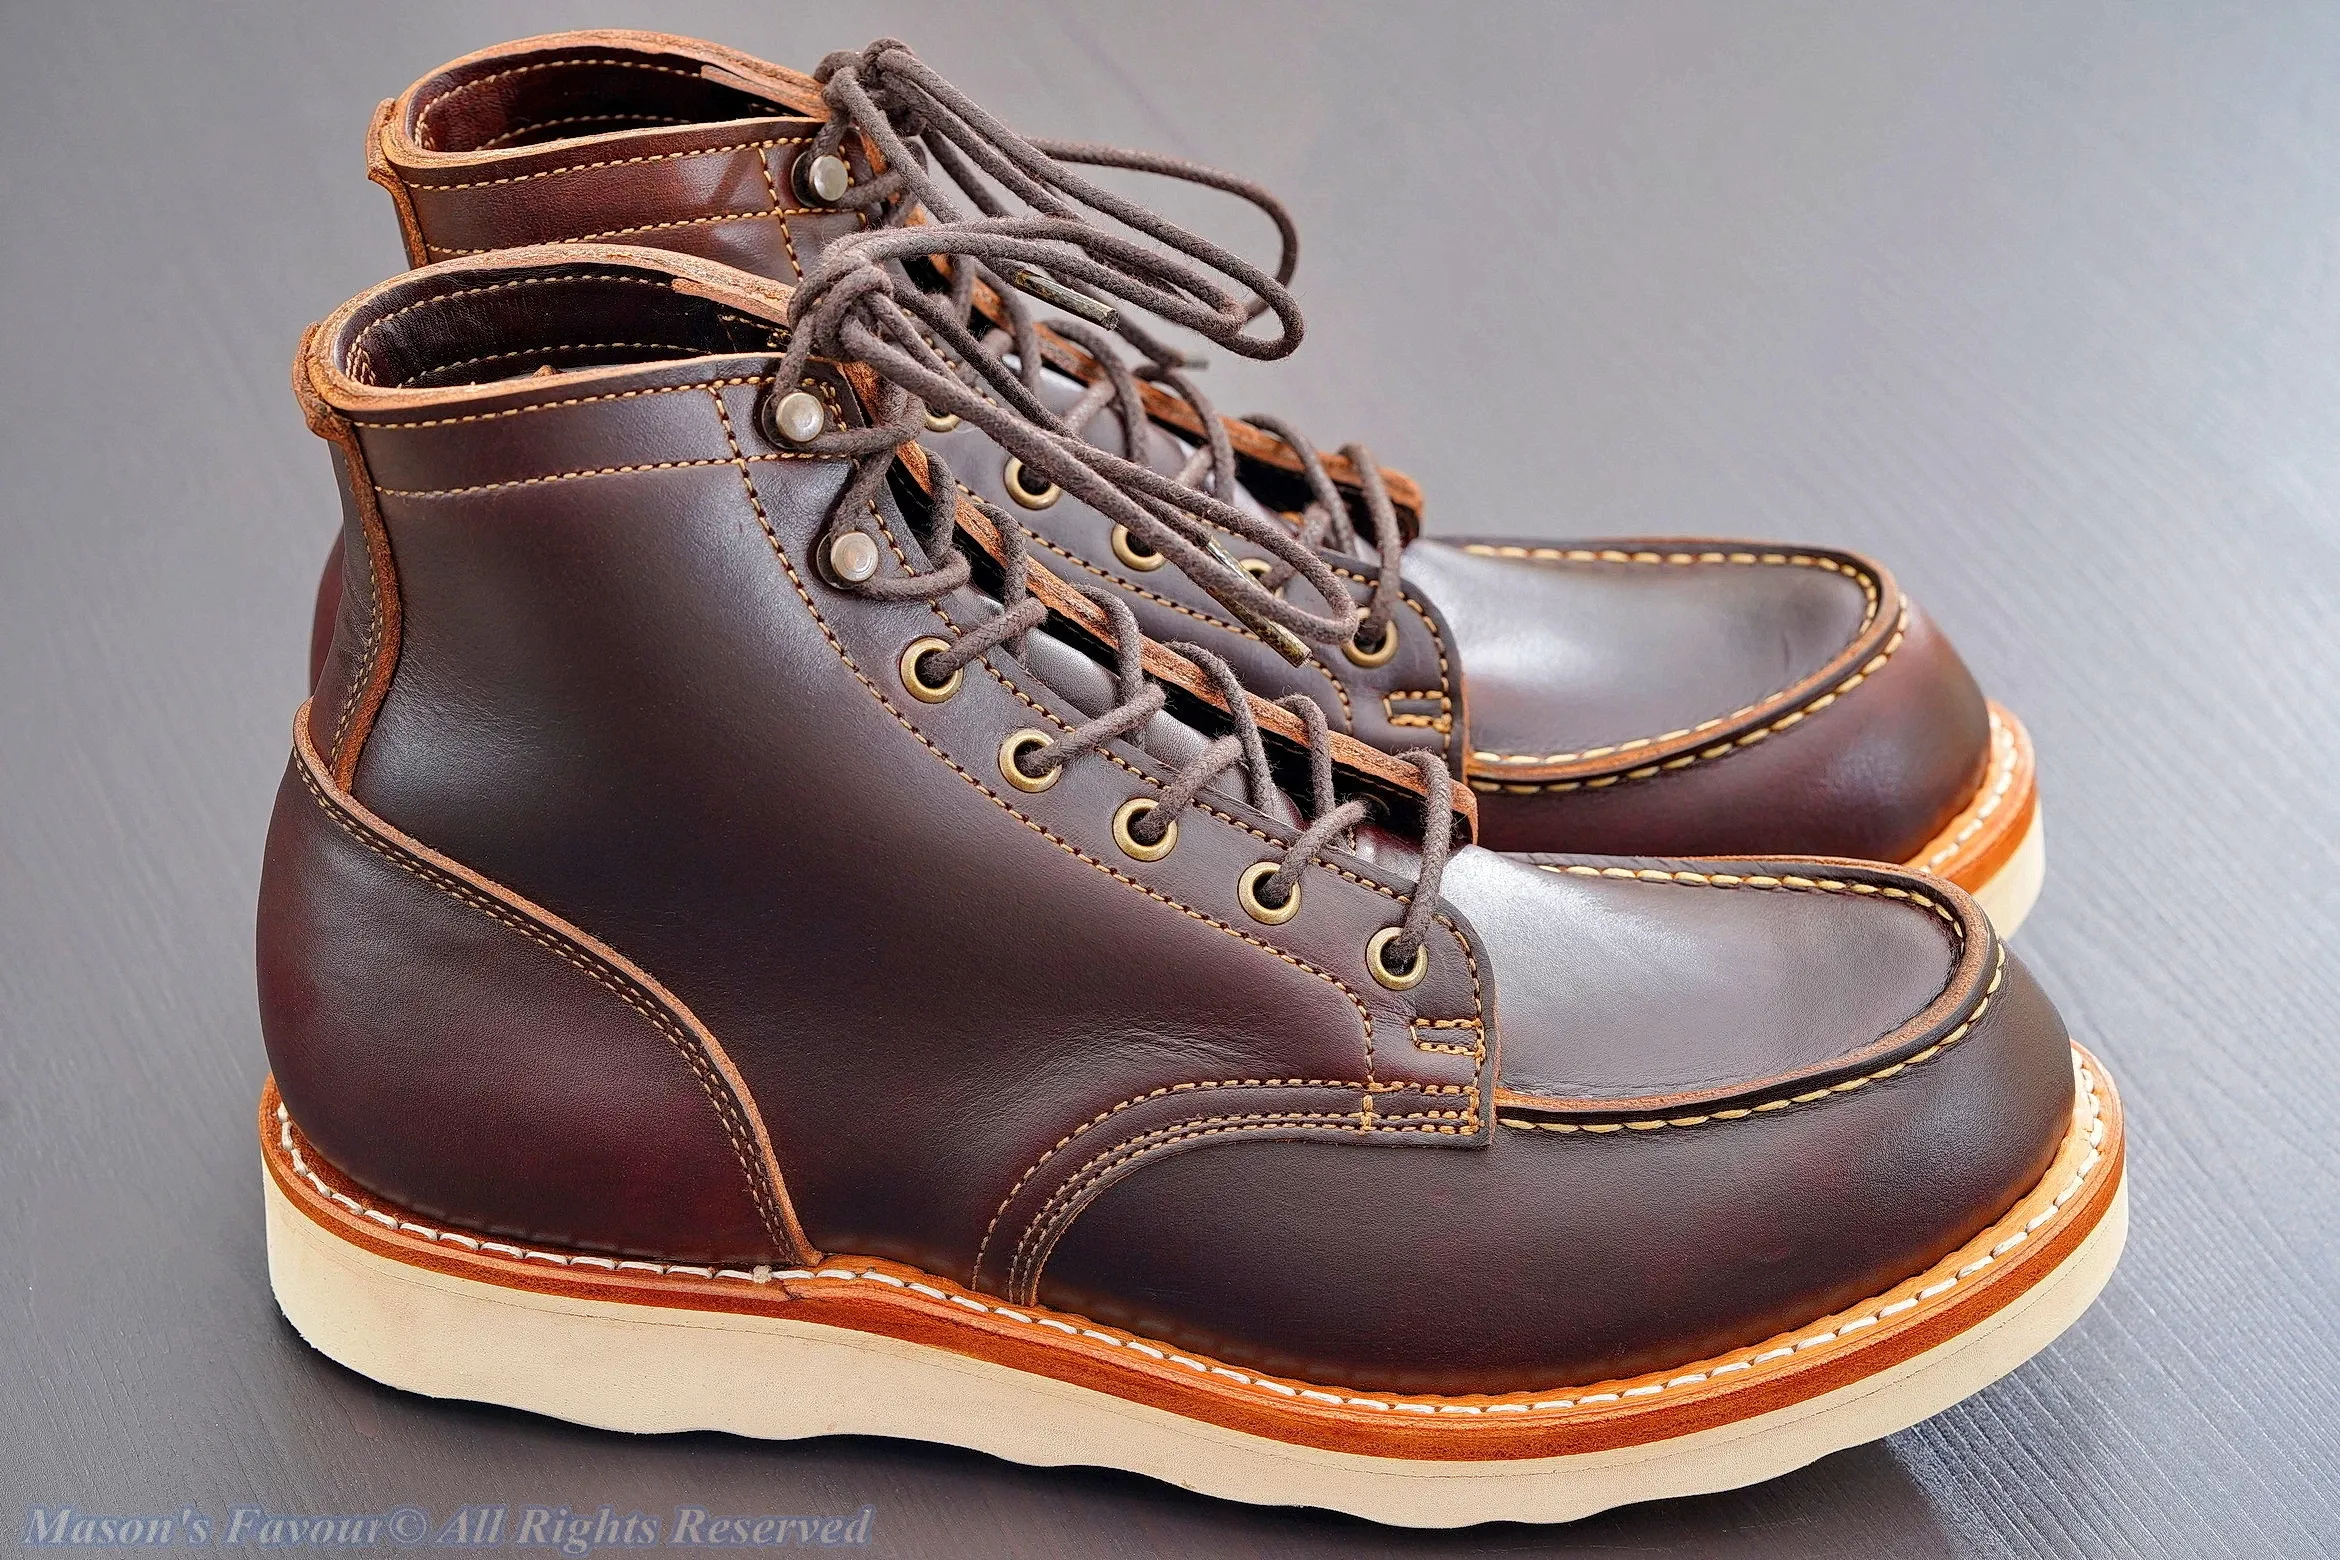 Truman Boots Bay Double Shot Moc Toe - Right Side with Laces